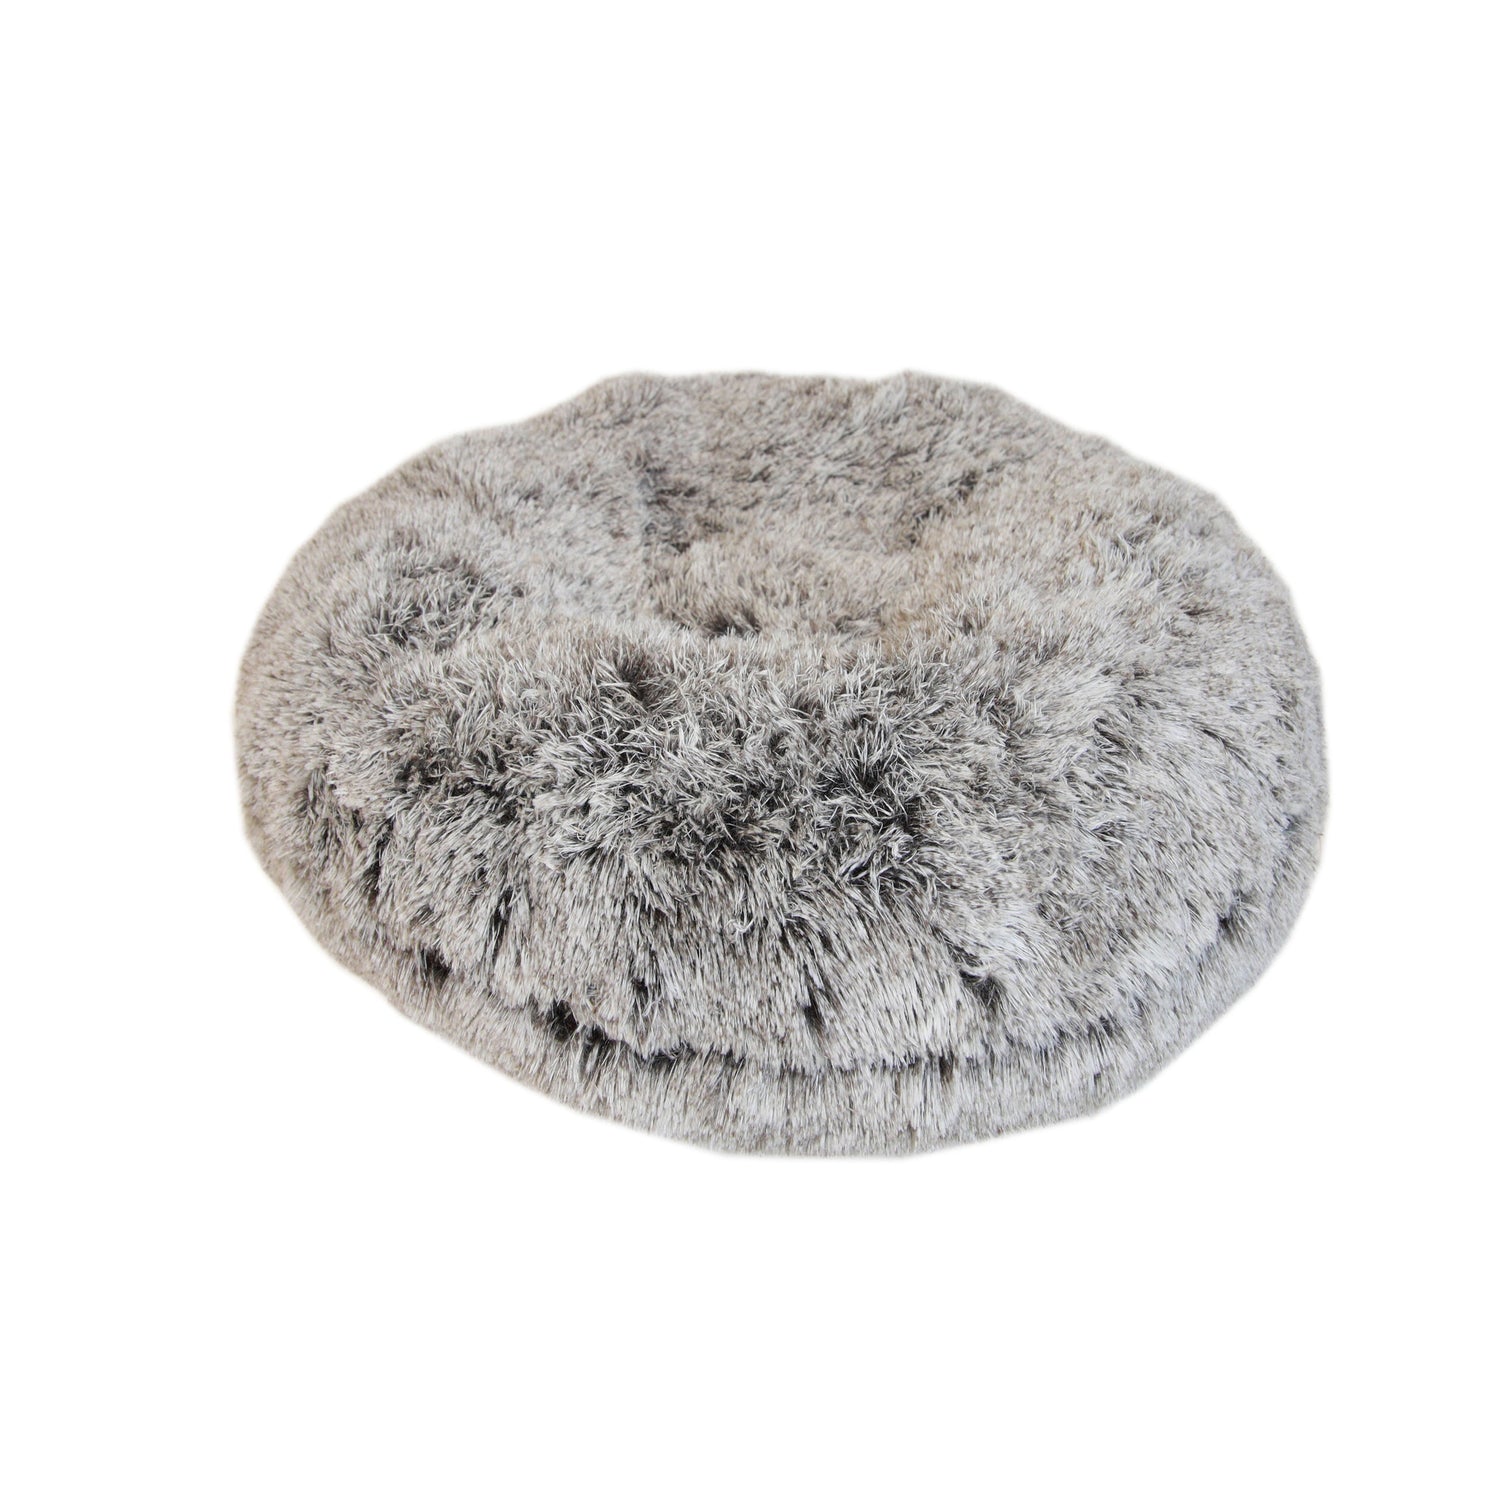 The Kentucky Comfort Donut dog bed has been specially designed to help your dog relax and sleep peacefully.  Its donut shape and comfortable fake fur makes the dog feels secure like in a nest, providing ultimate relaxation.